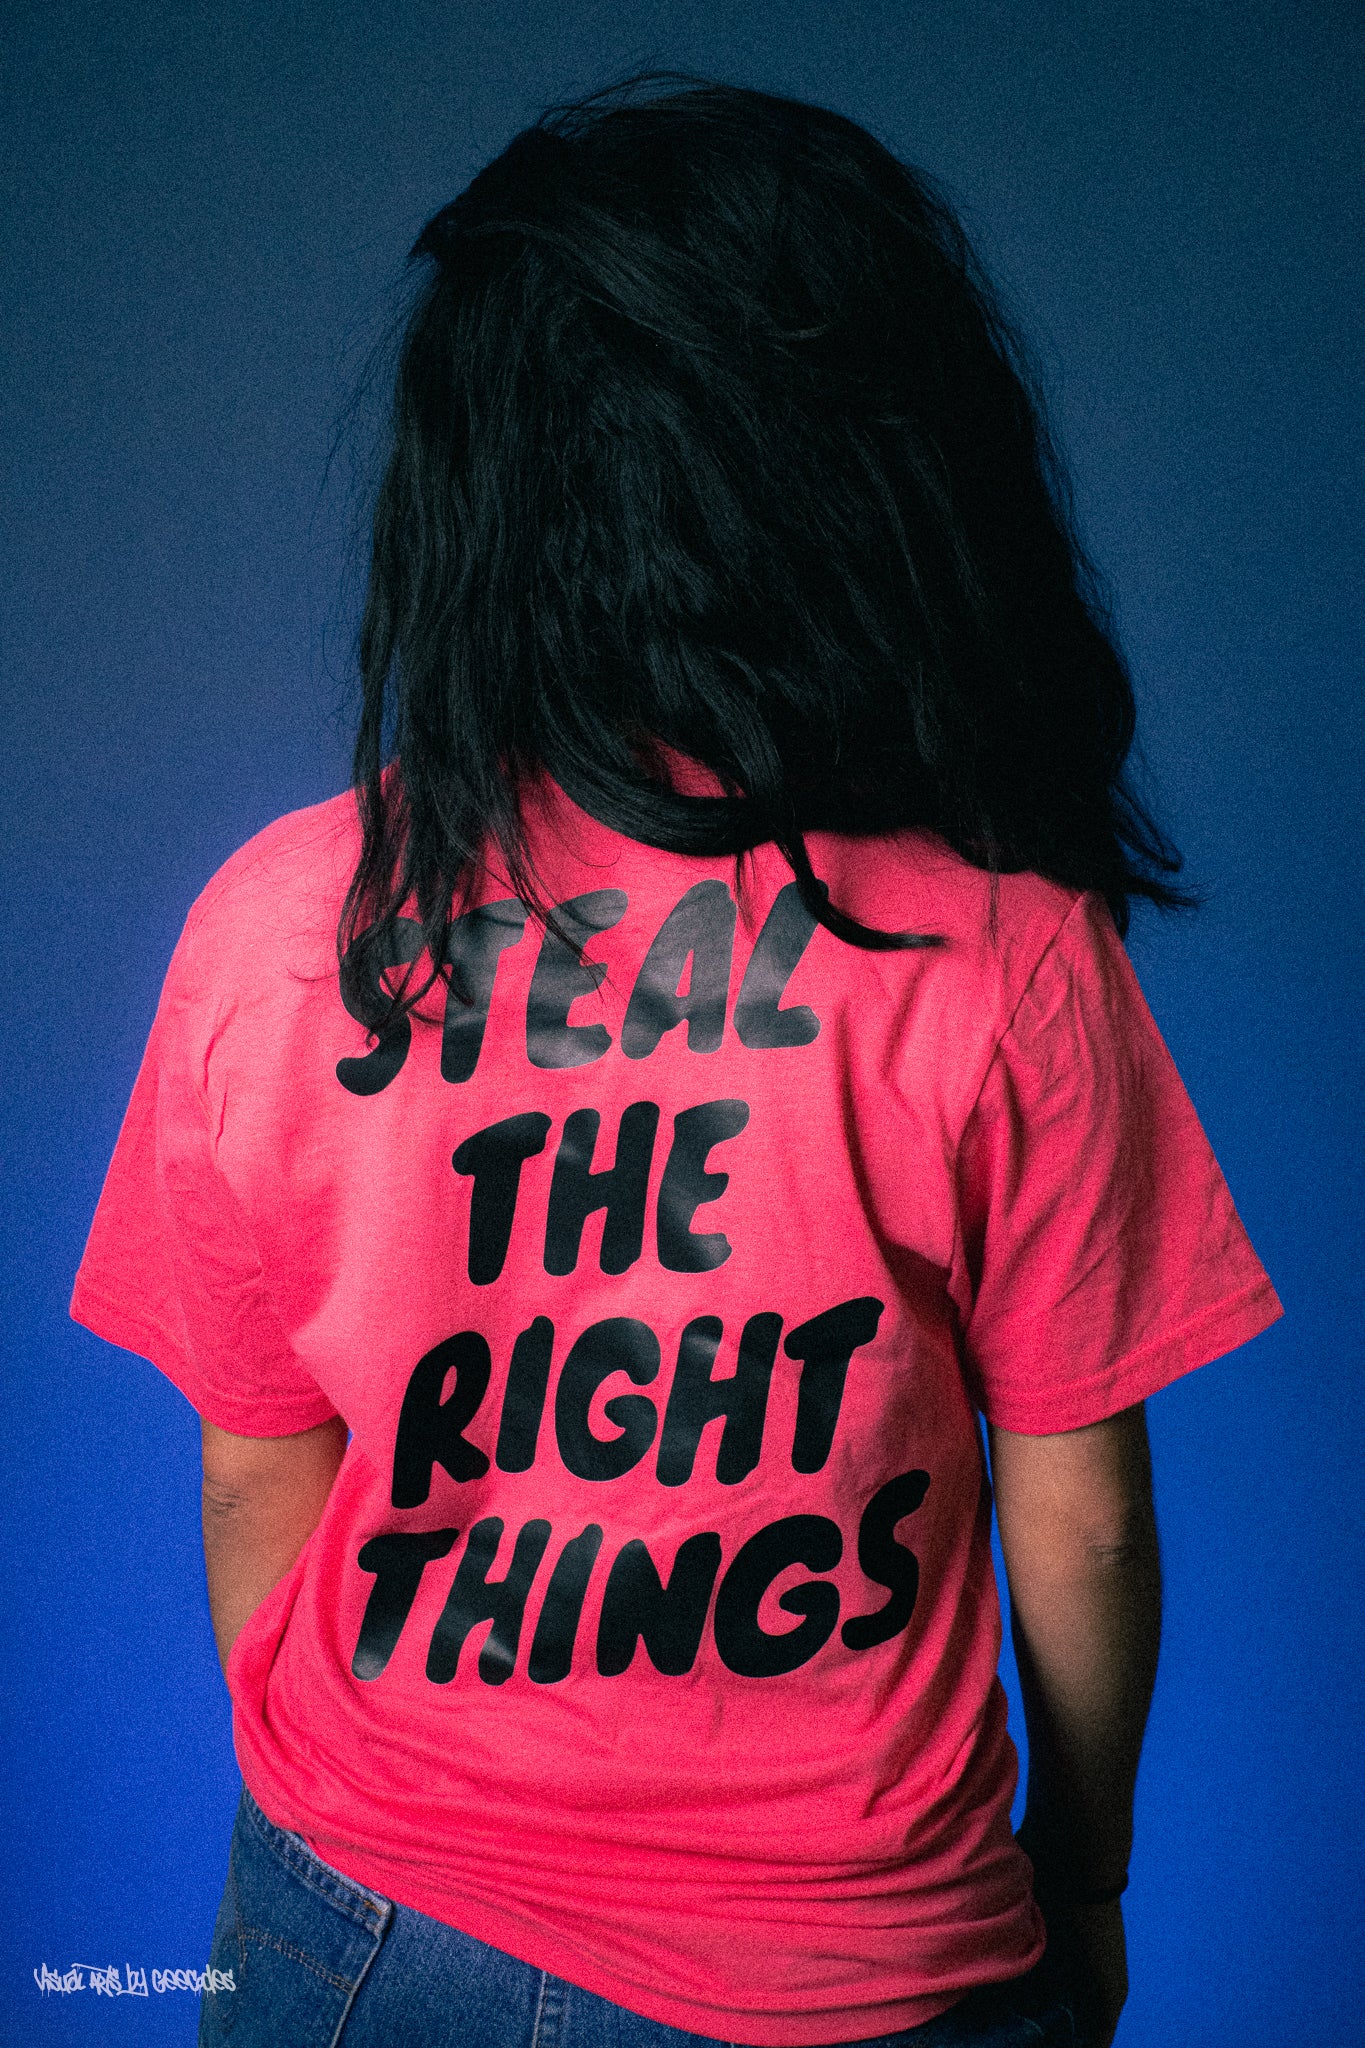 “Steal the right things”